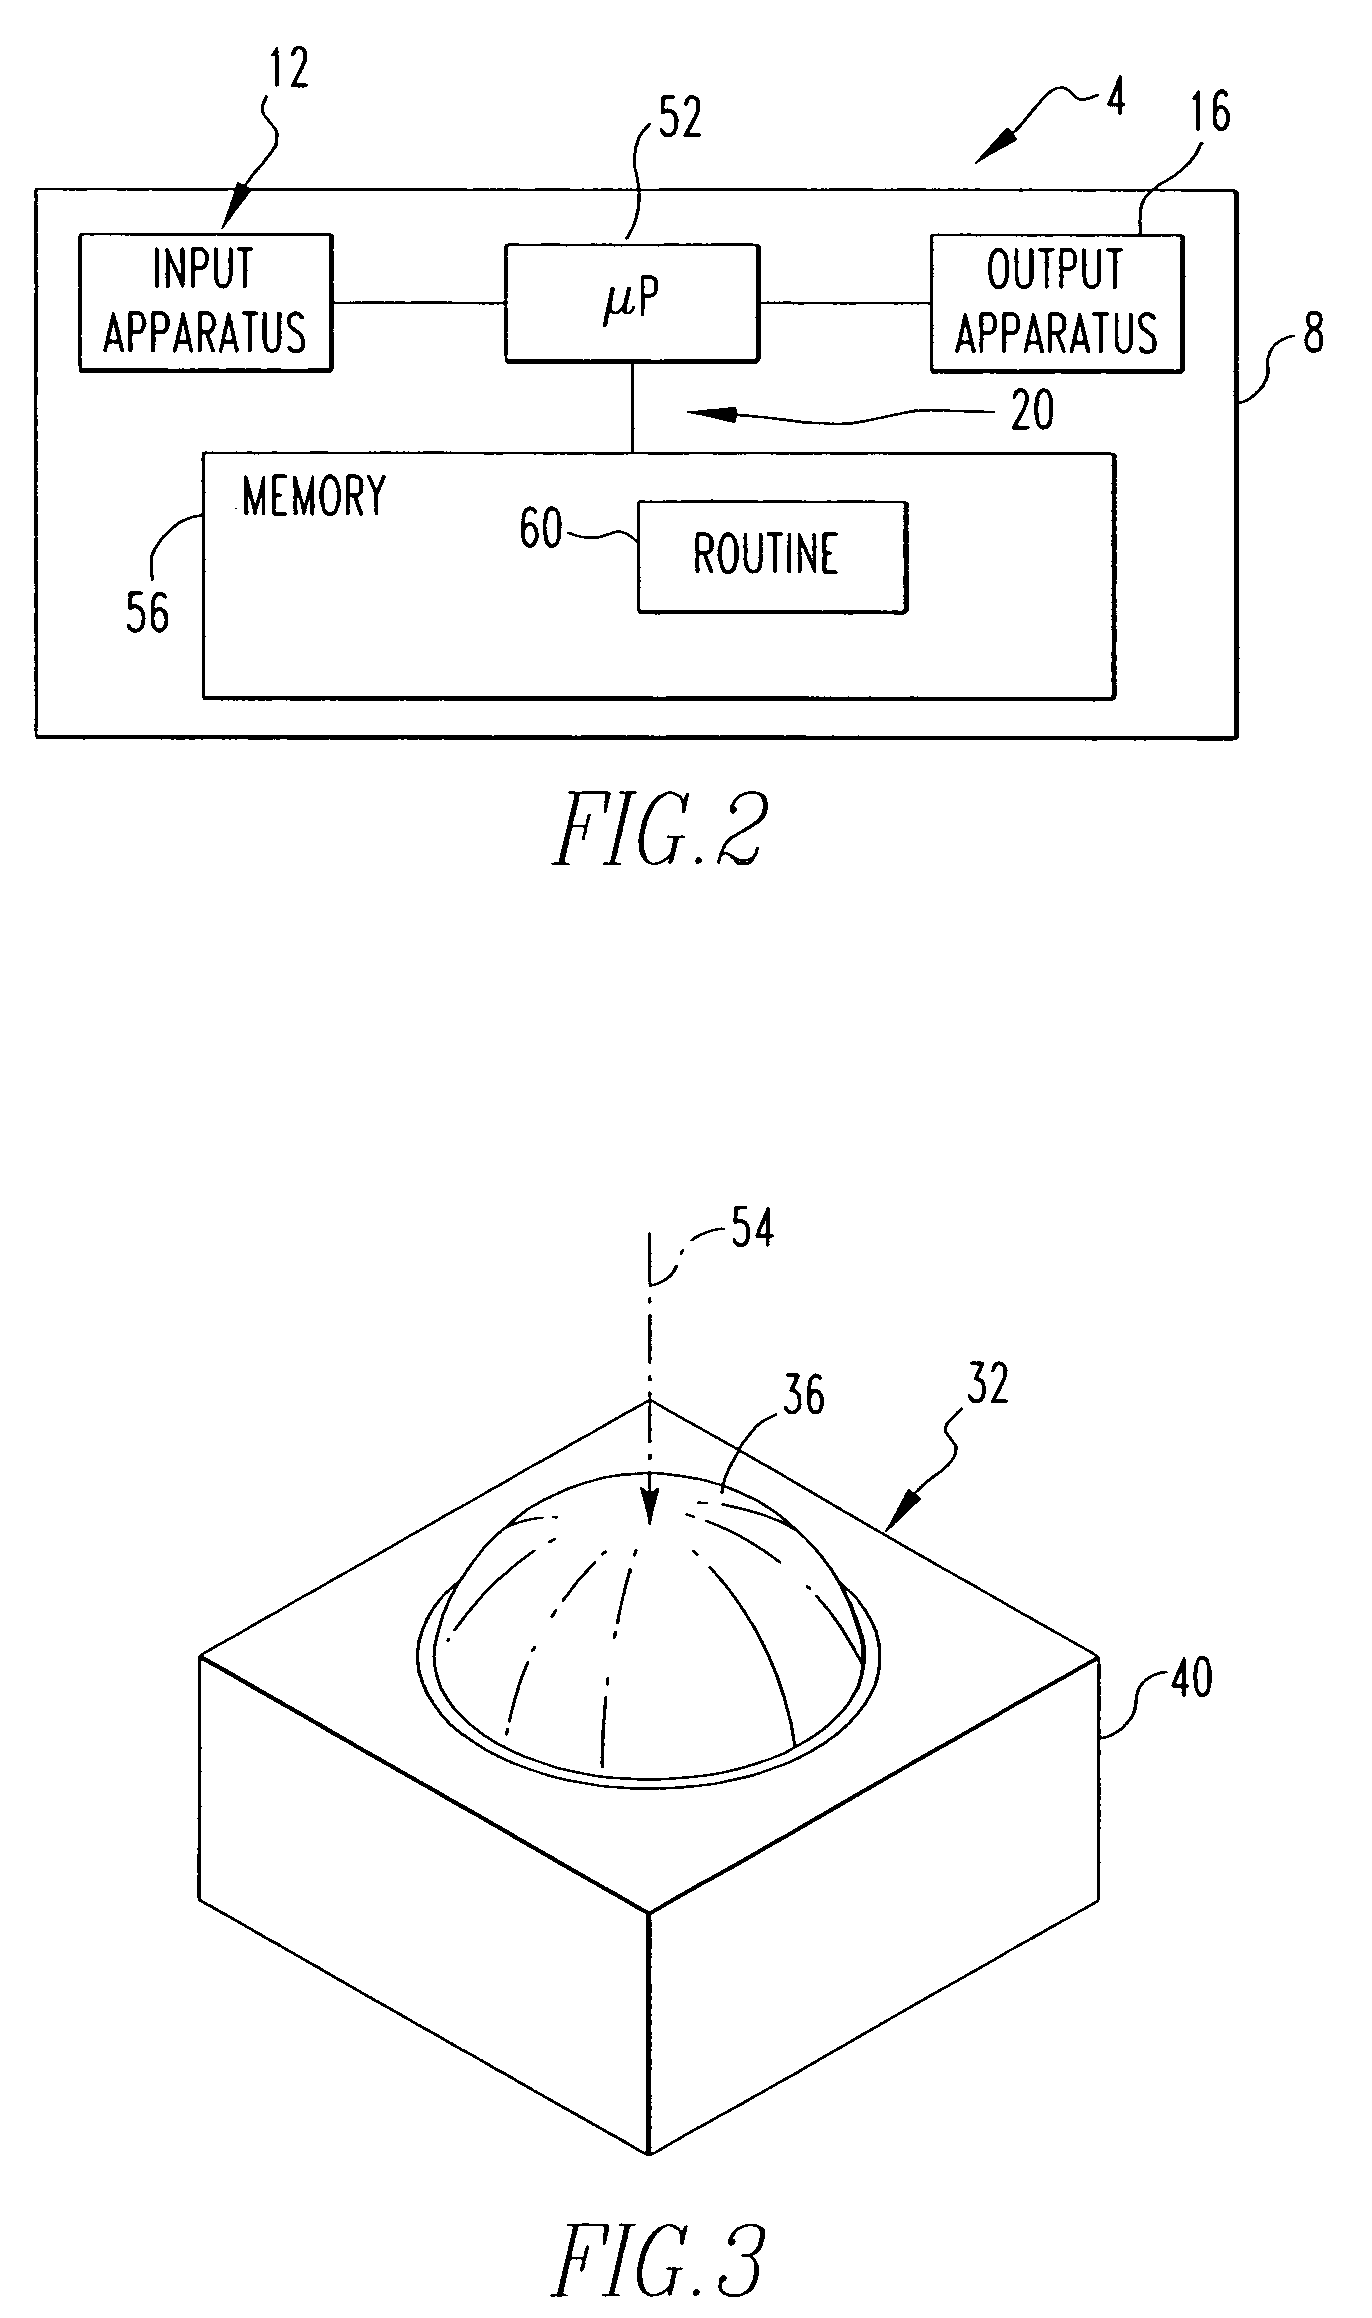 Handheld electronic device with roller ball input